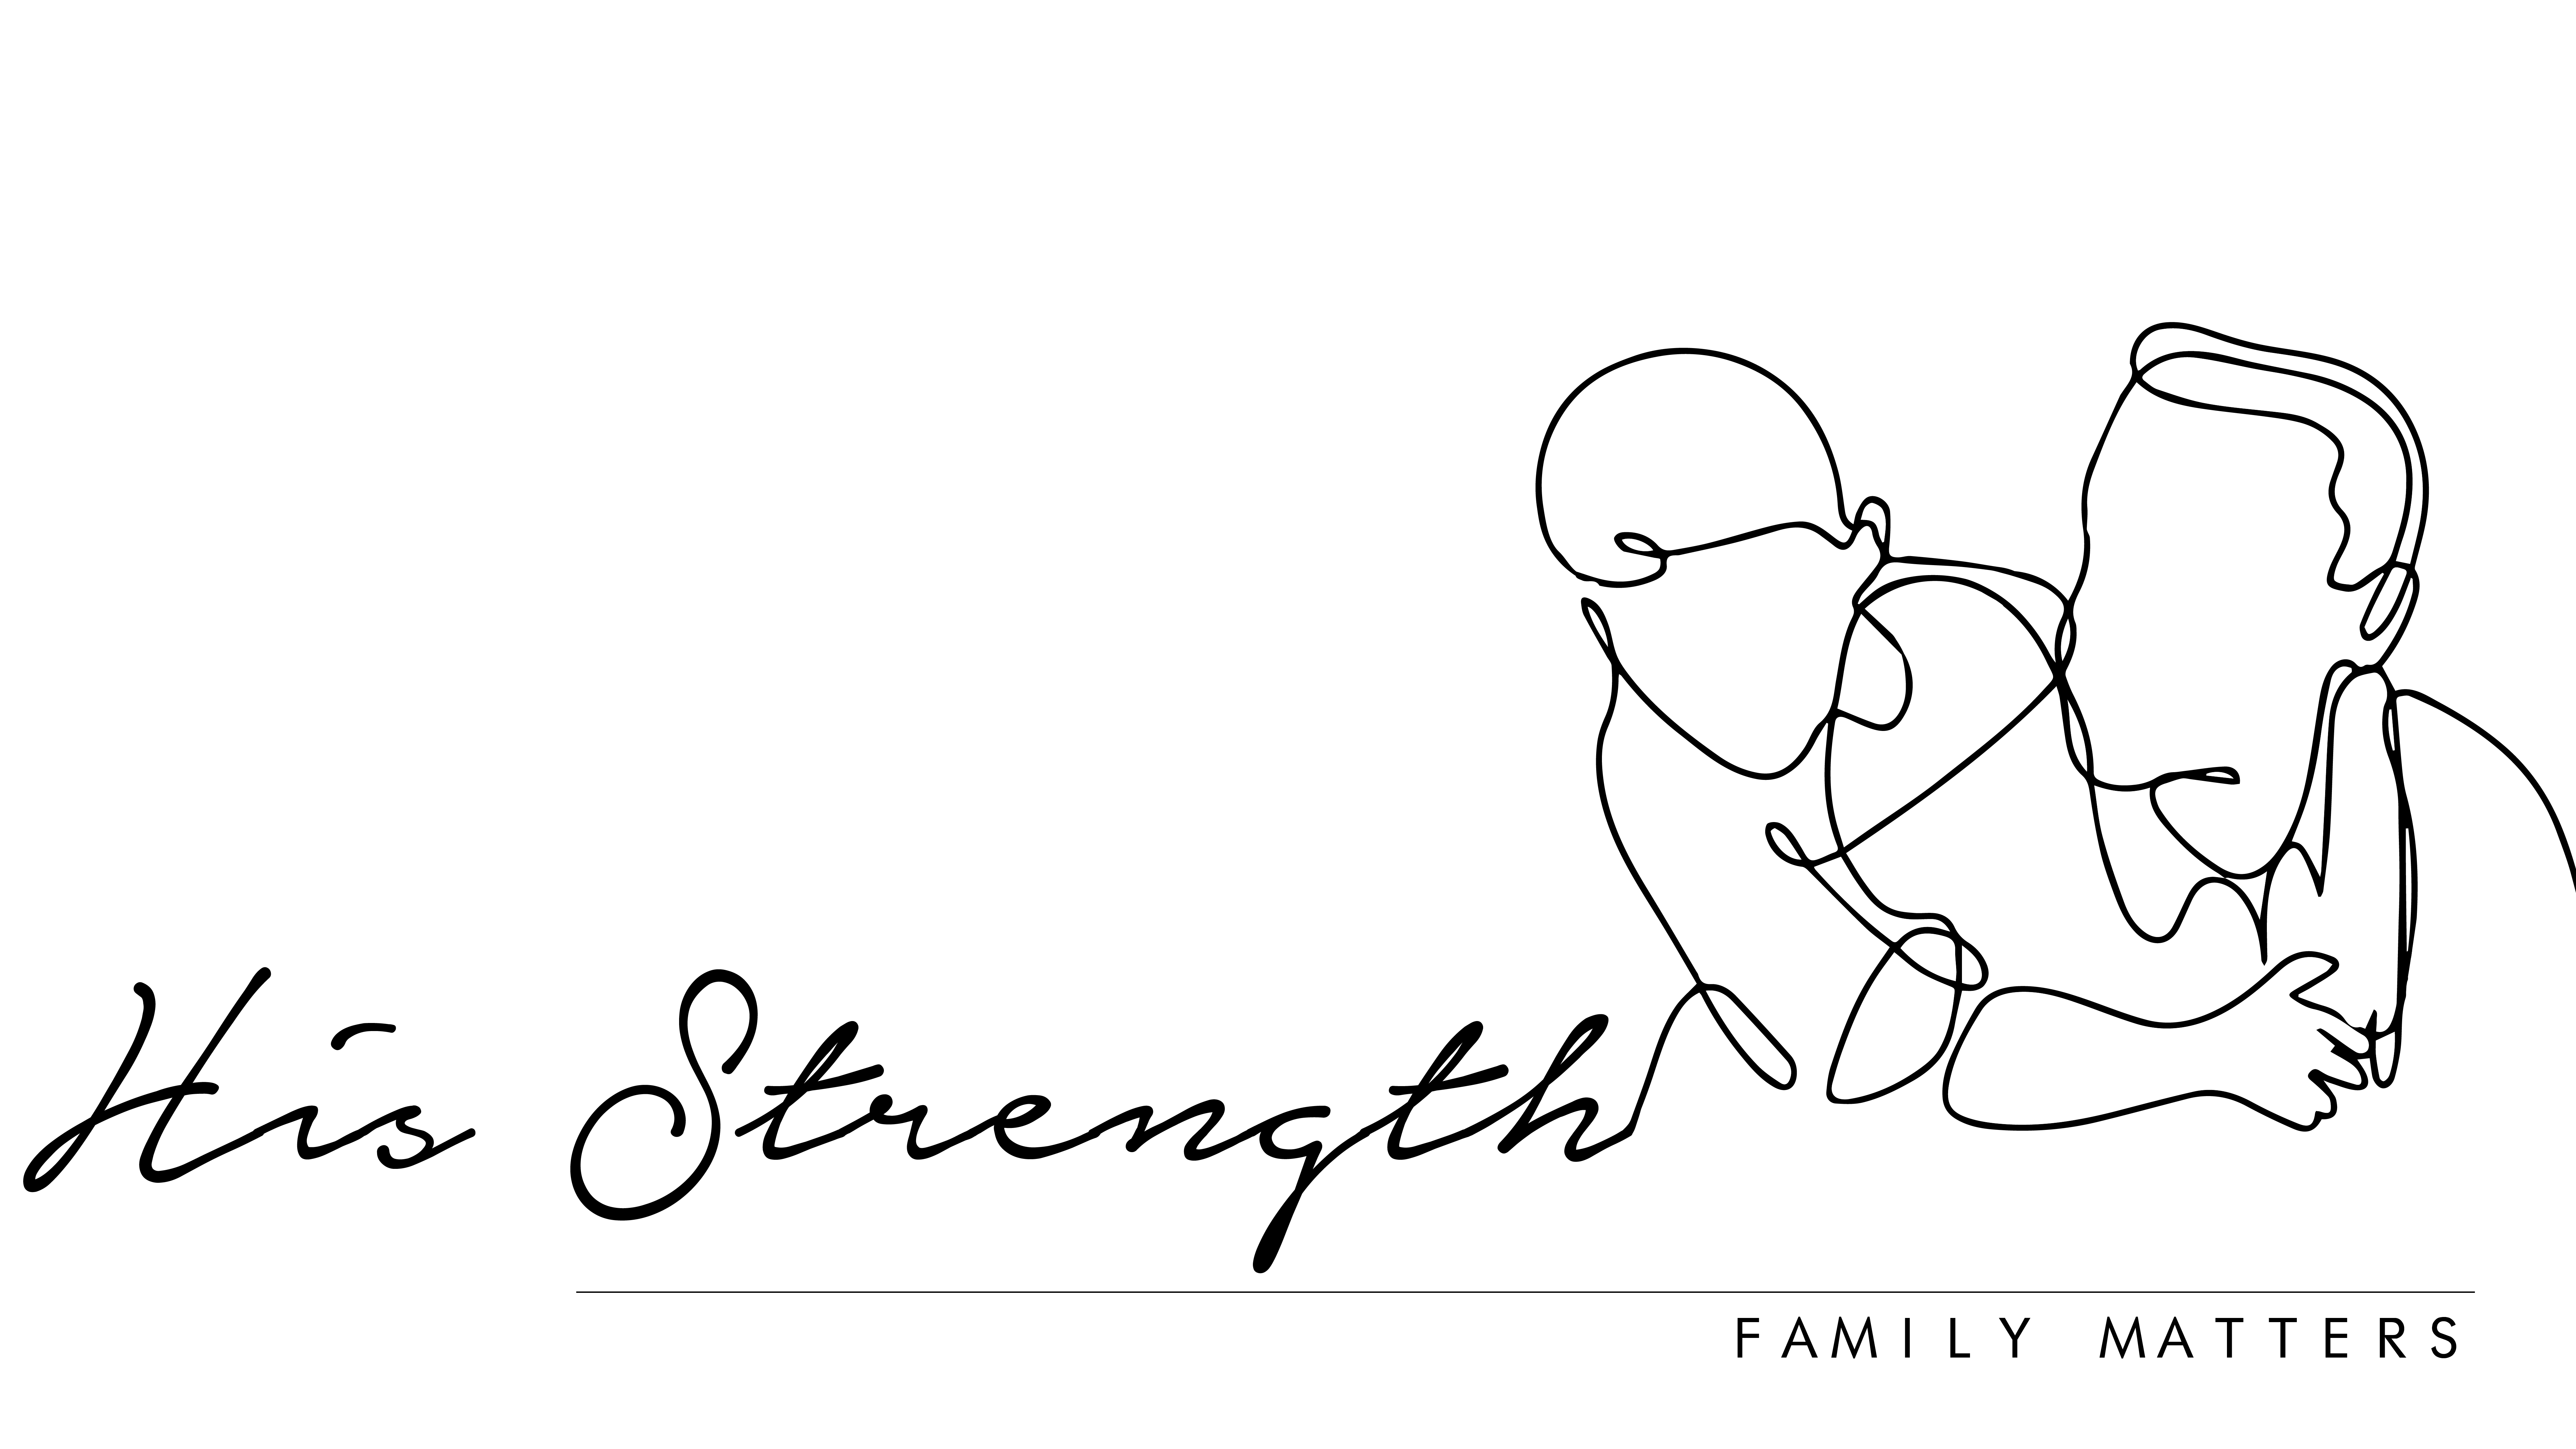 Family Matters - His Strength